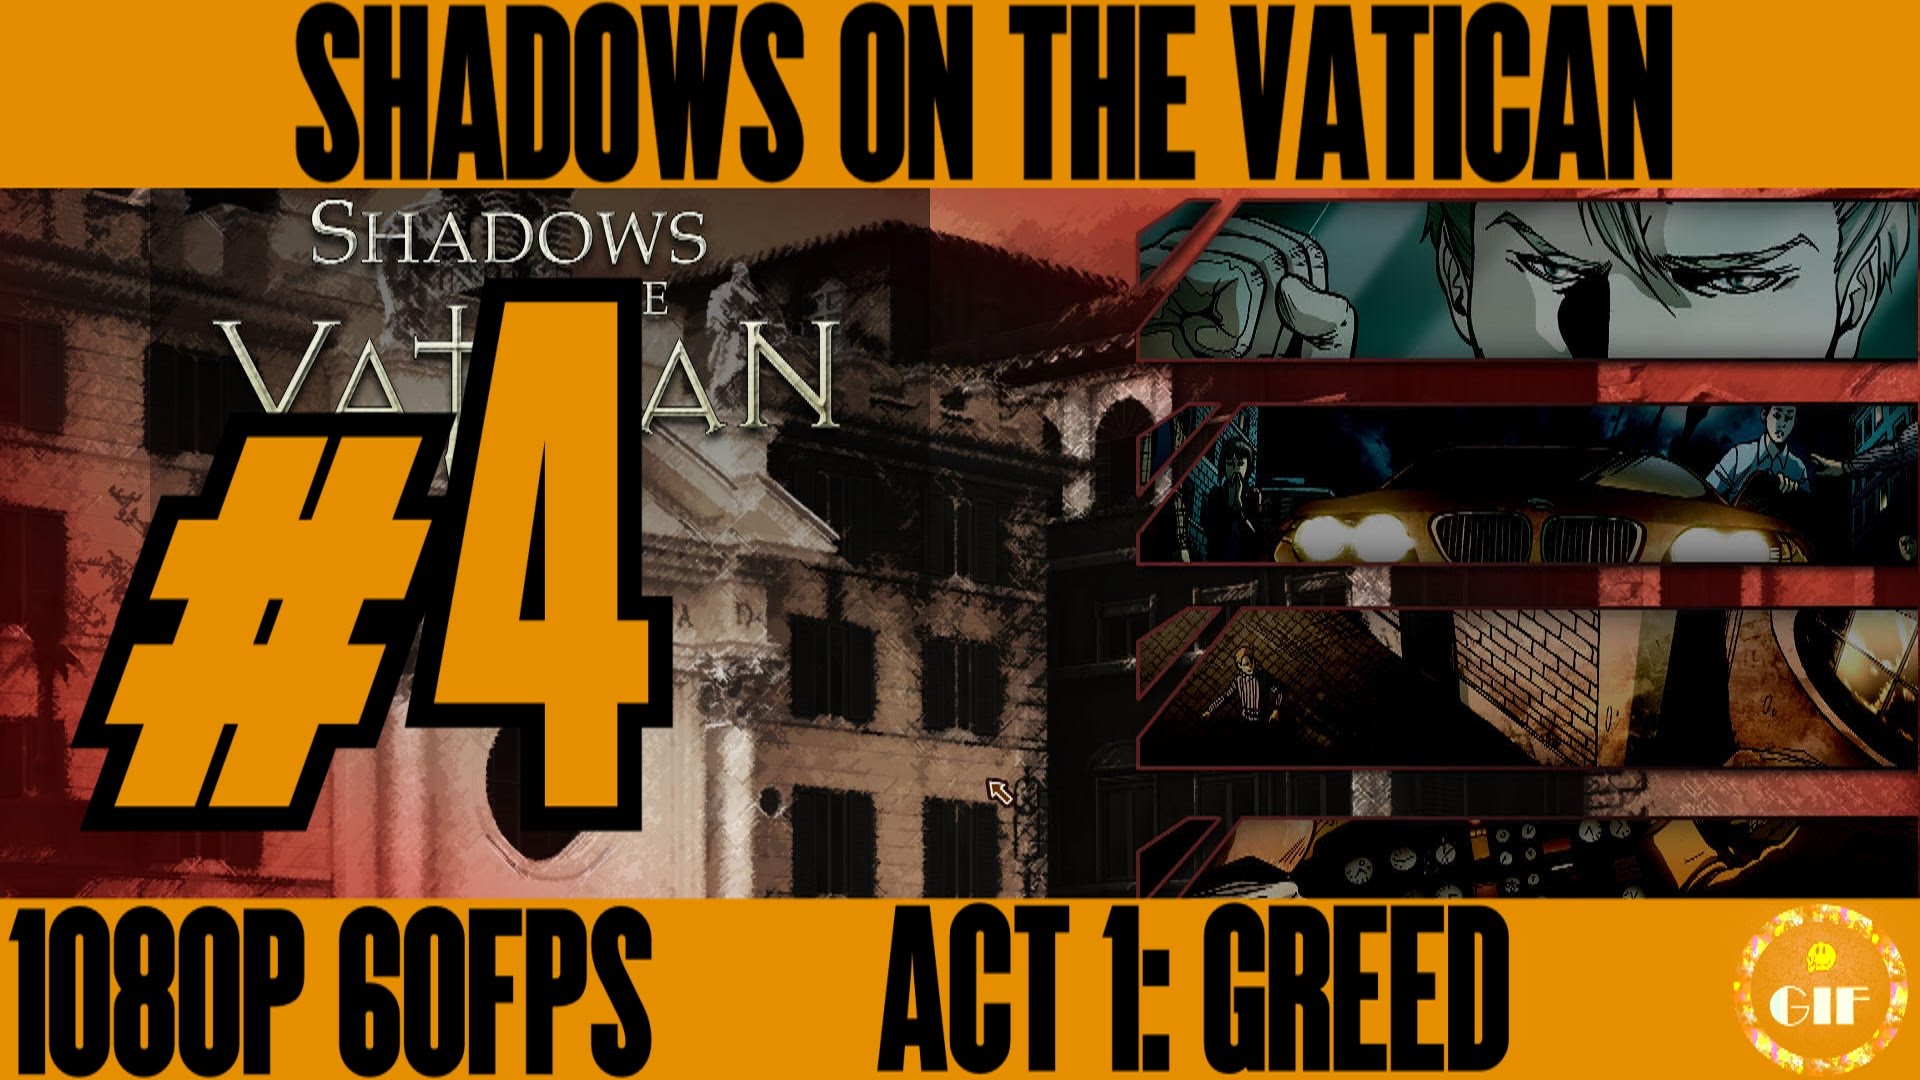 Shadows On The Vatican - Act I: Greed Backgrounds, Compatible - PC, Mobile, Gadgets| 1920x1080 px